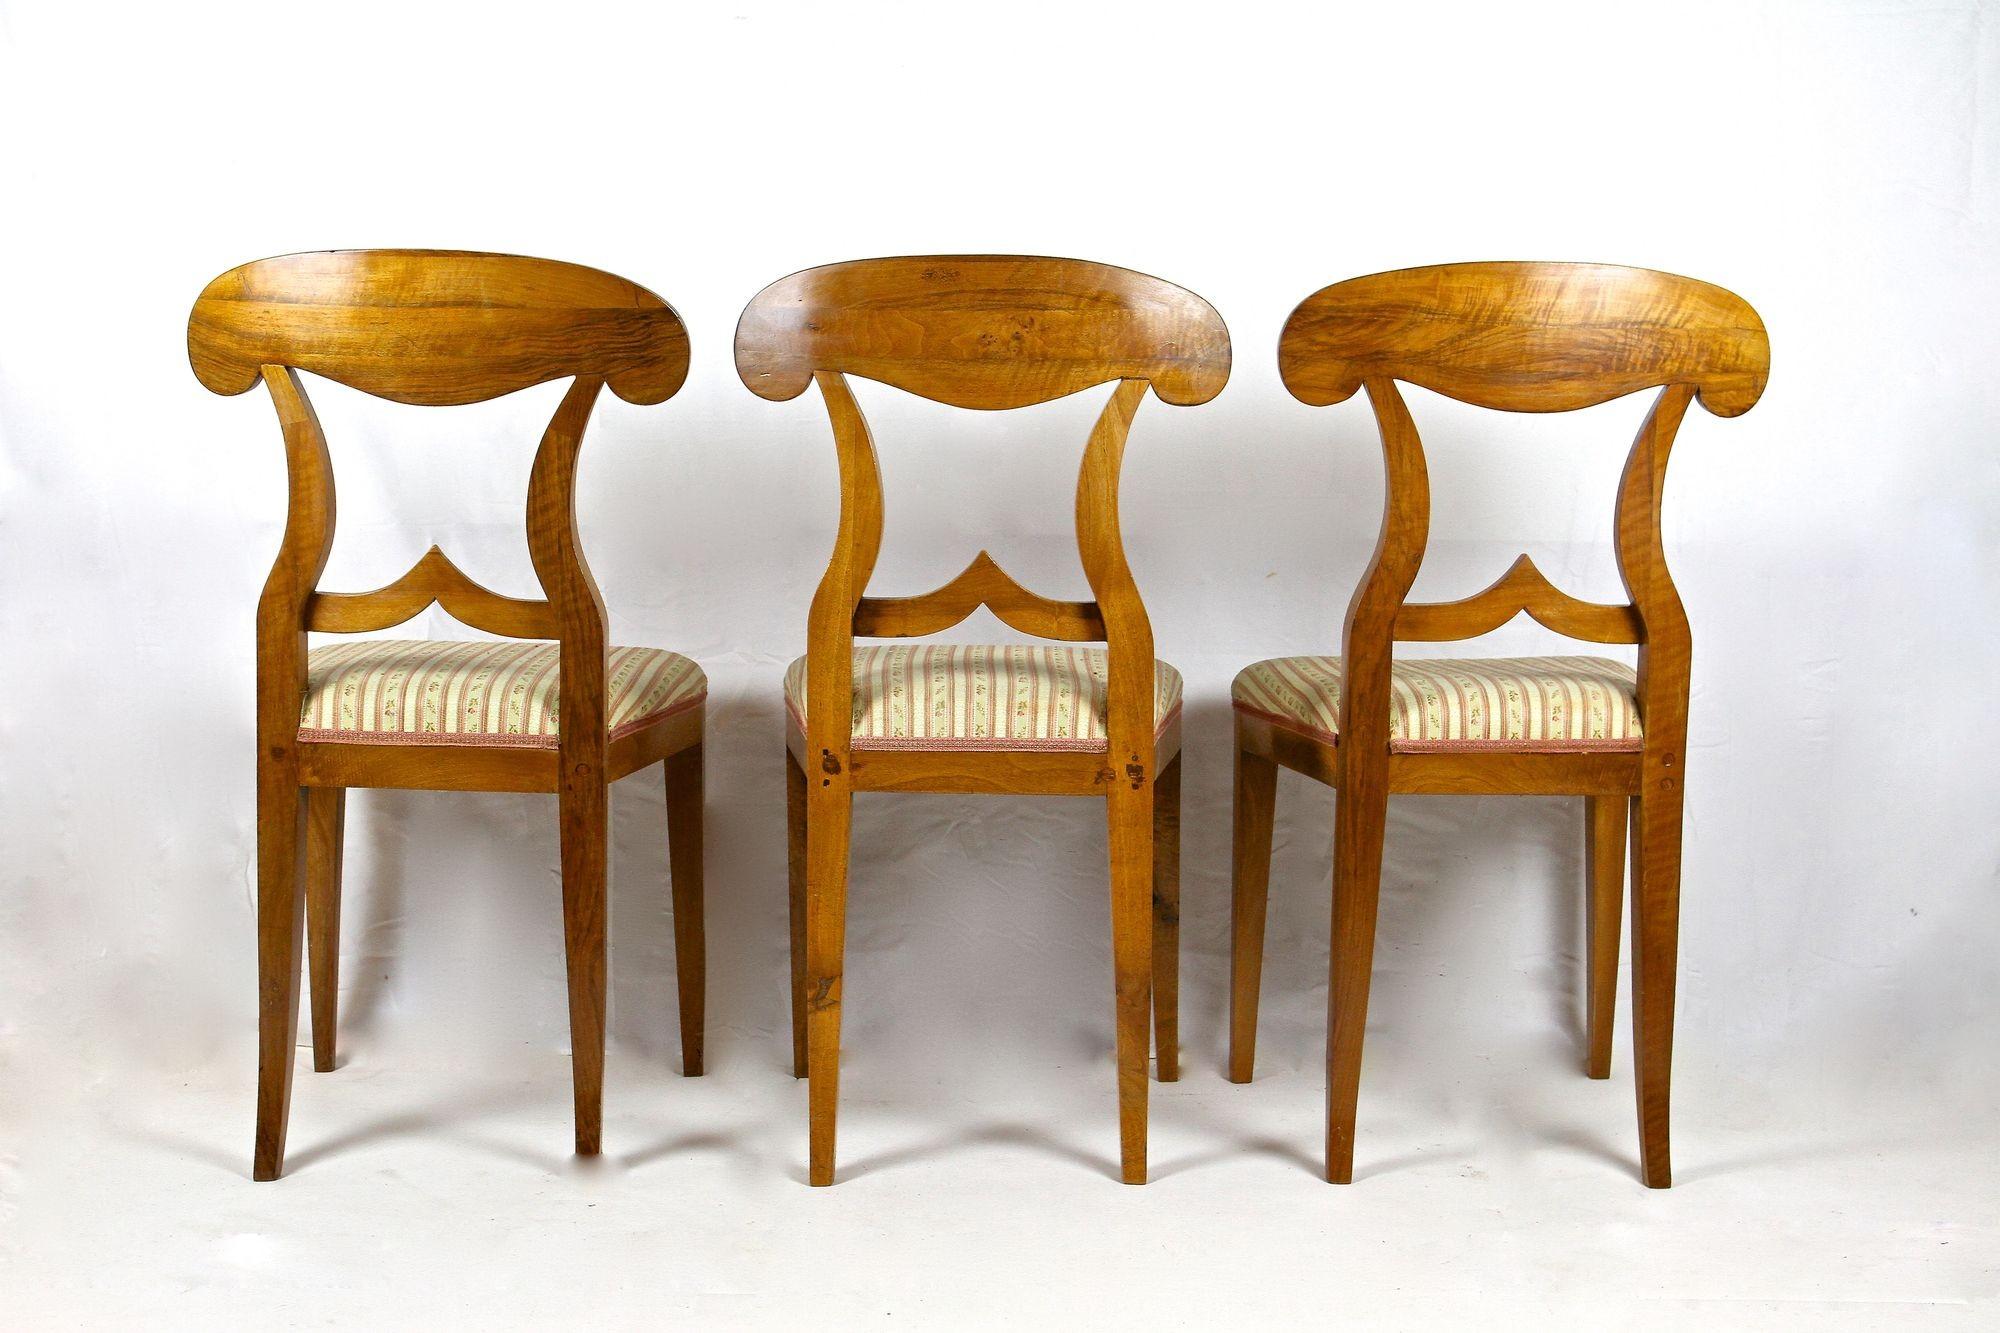 Set Of 6 Biedermeier Nutwood Shovel Dining Chairs, 19th Century, AT ca. 1830 For Sale 7